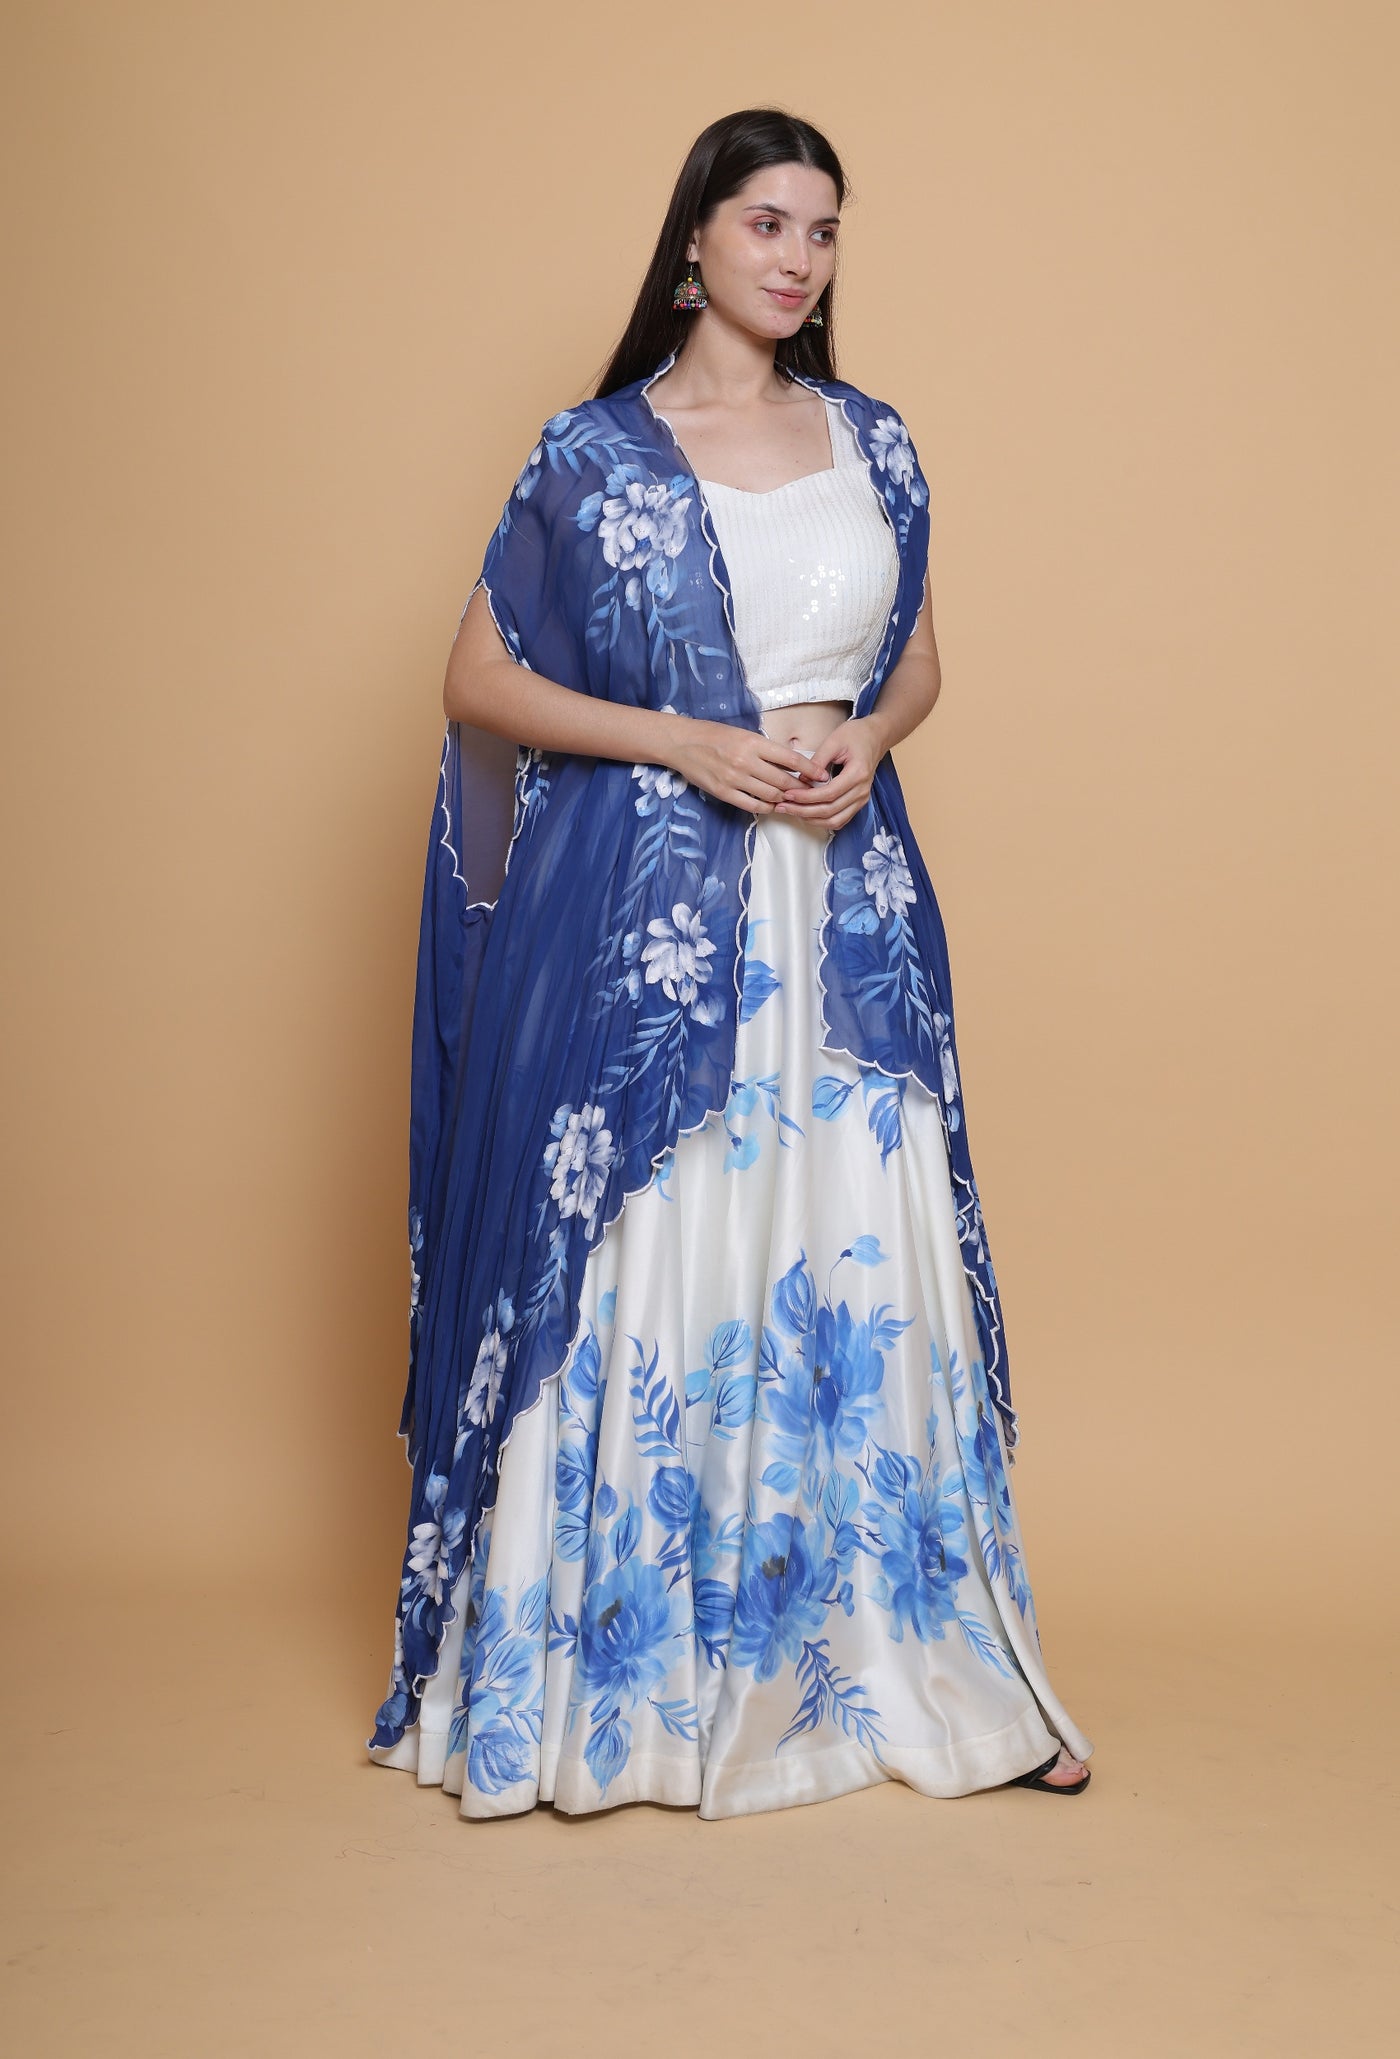 Destiny By Anjali Celestial Elegance White Hand Painted Skirt Top Set with Blue Cape - Unique Designer Ensemble for Special Occasions."